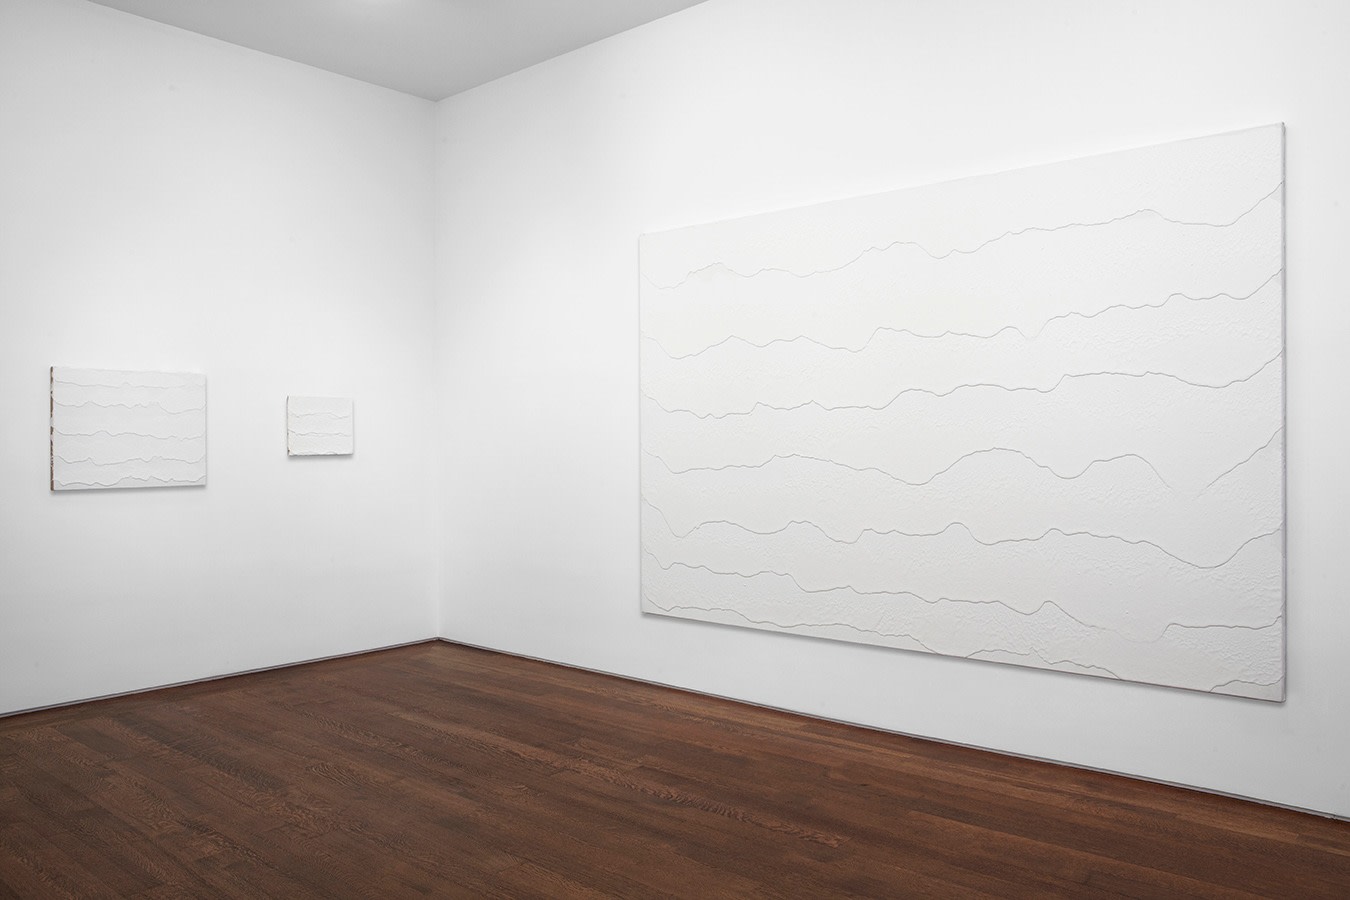 Installation view of Miquel Barcel&oacute; at Acquavella Galleries from October 8 - November 21, 2013.